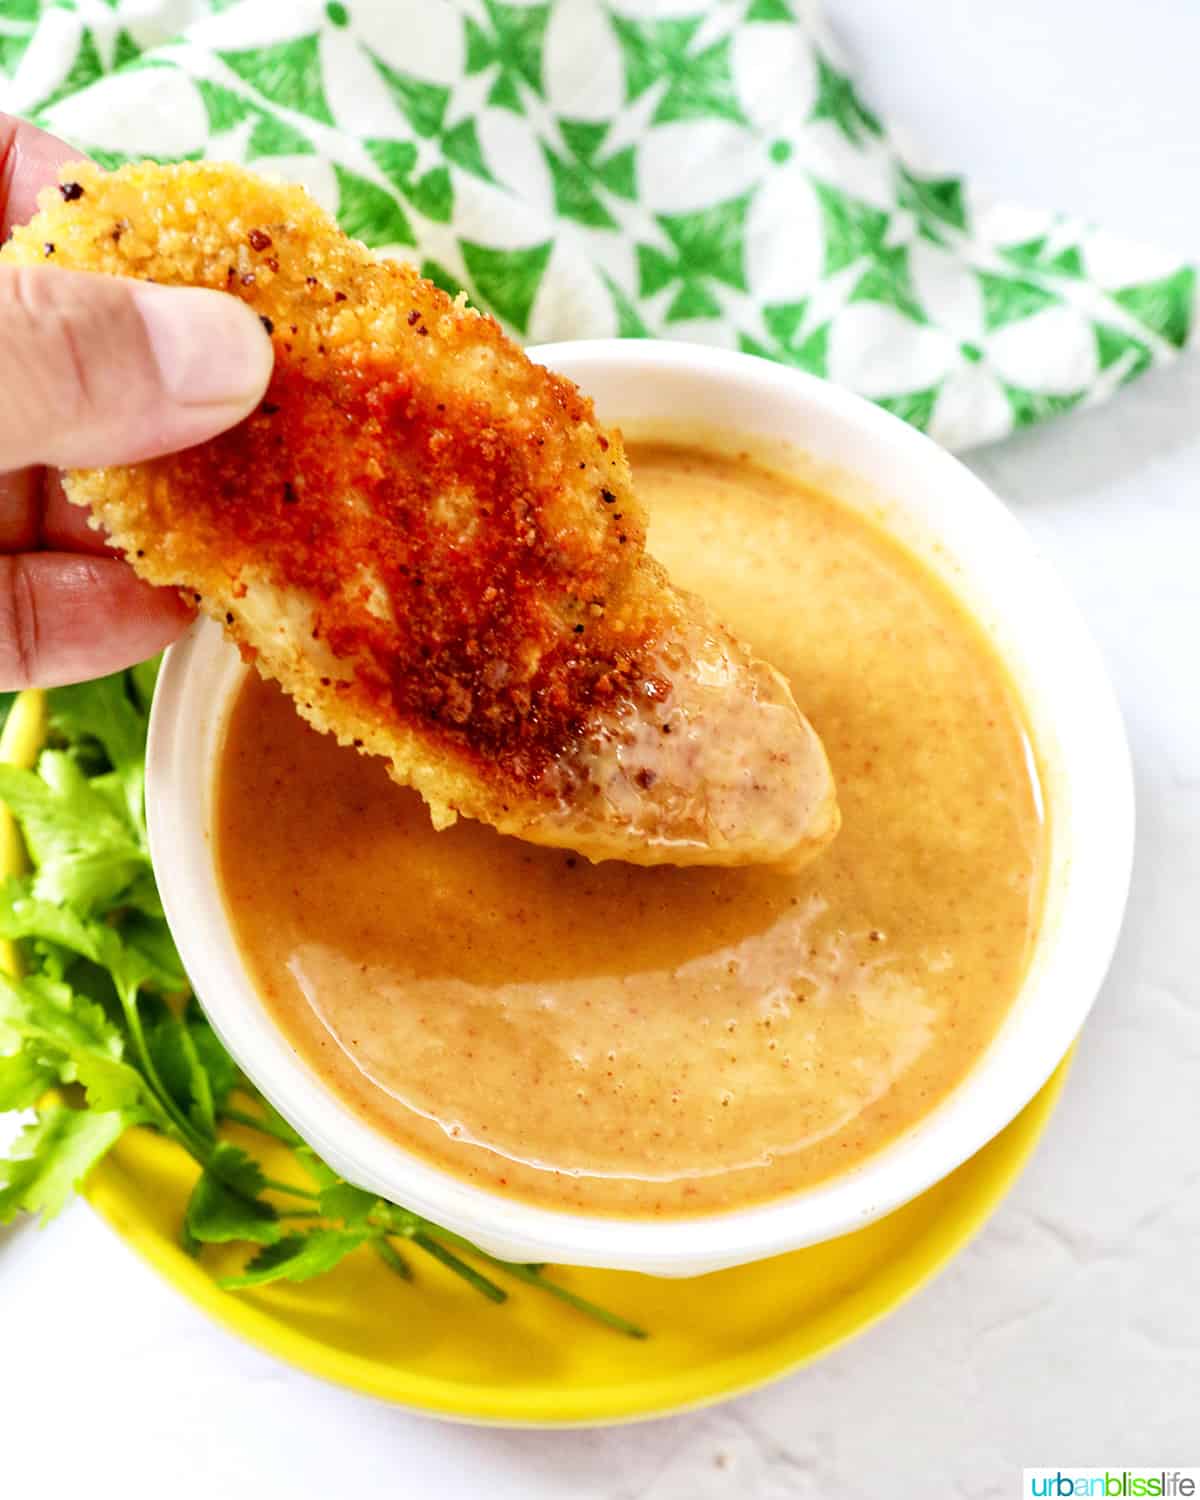 hand dipping a chicken tender into a bowl of honey mustard dipping sauce.